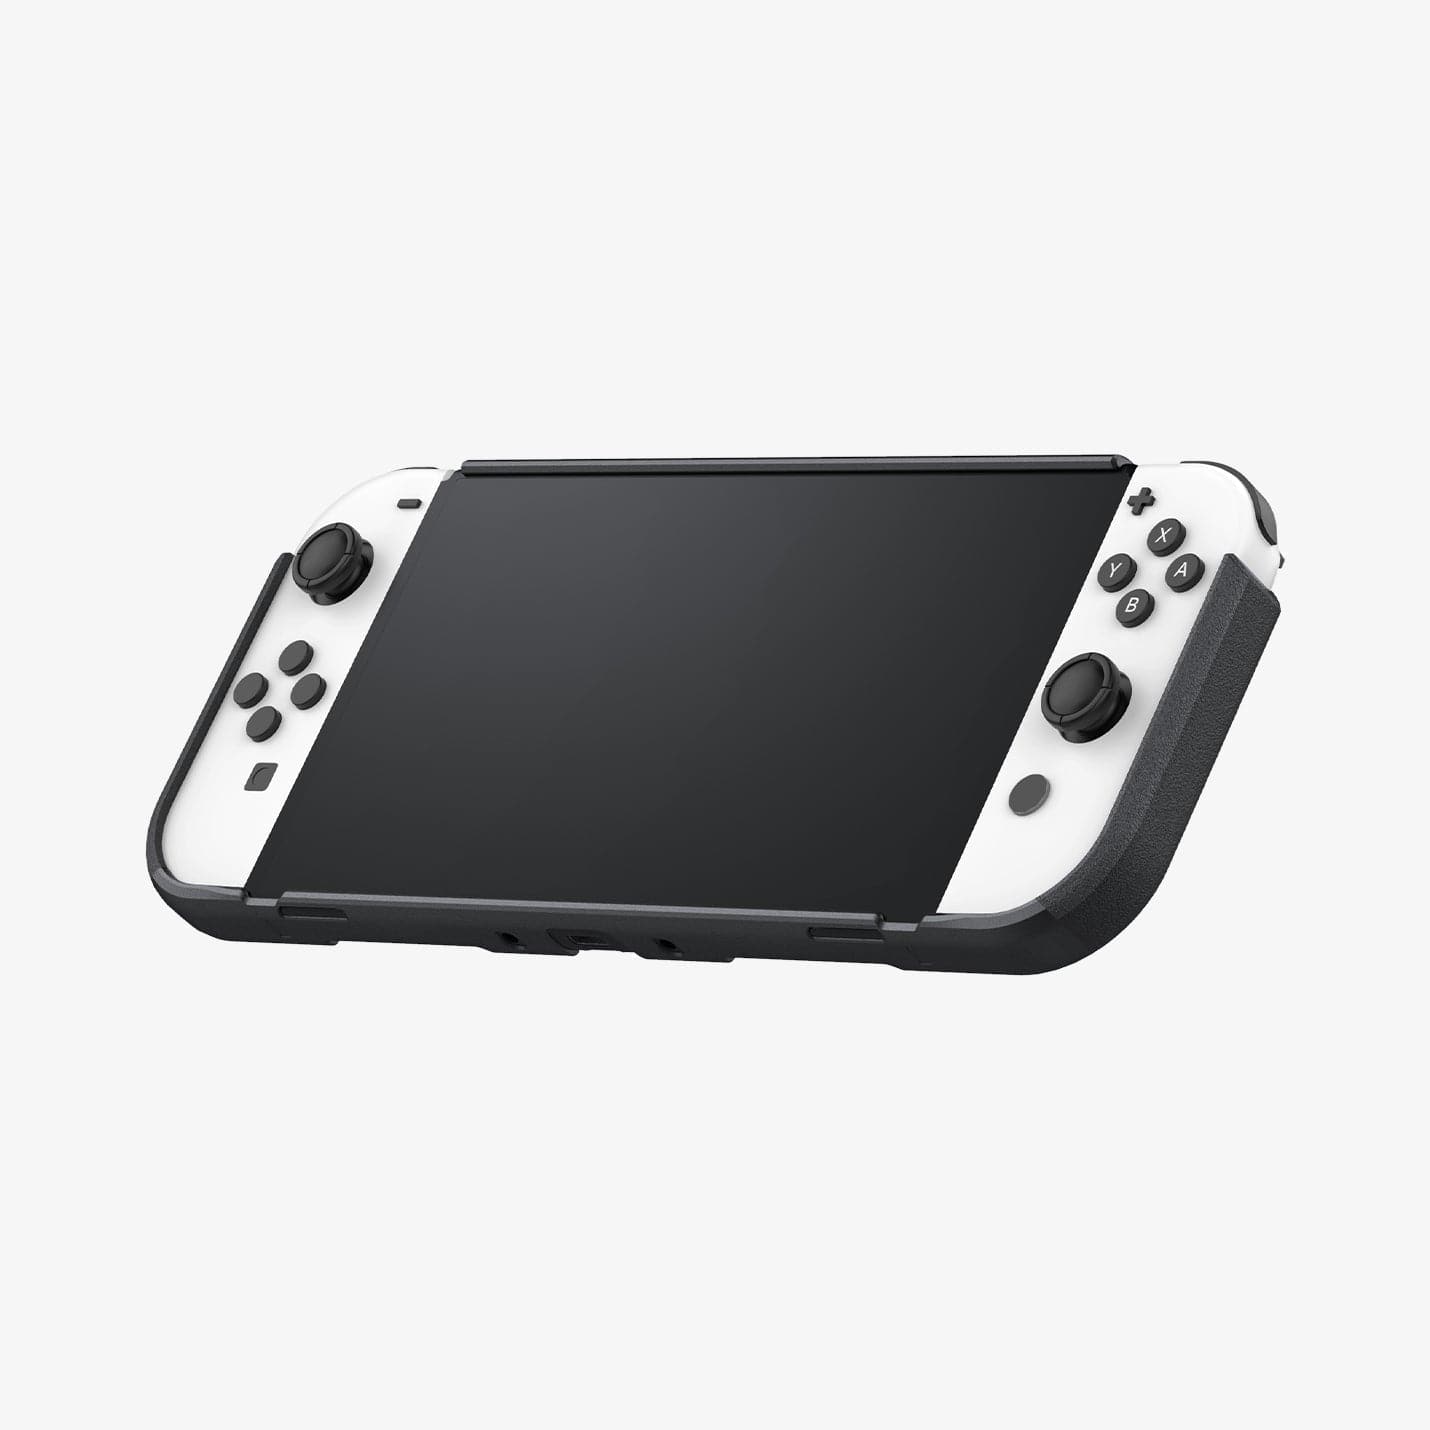 ACS04239 - Nintendo Switch OLED Case Thin Fit in black showing the front and partial side